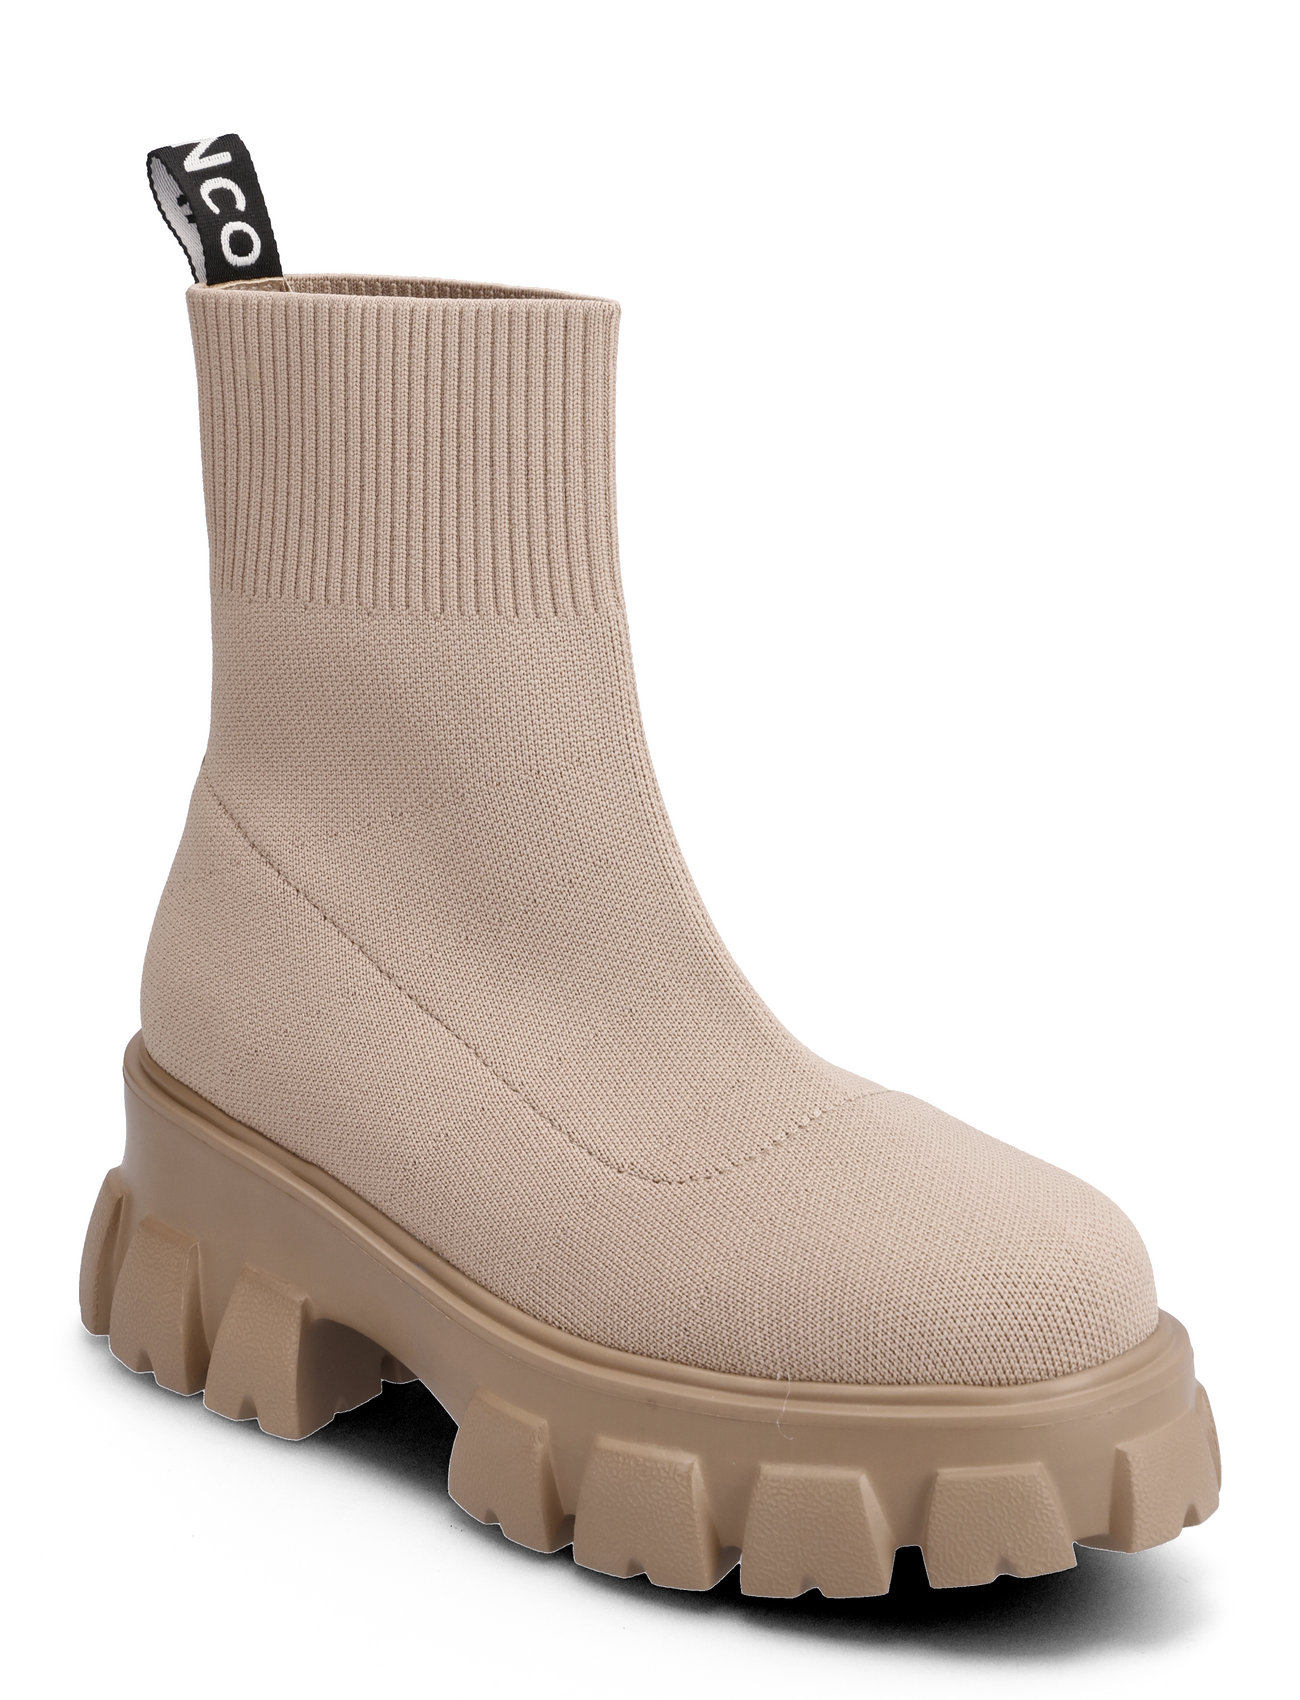 Biaprima Boot (50.39 €) Large selection of outlet-styles | Booztlet.com